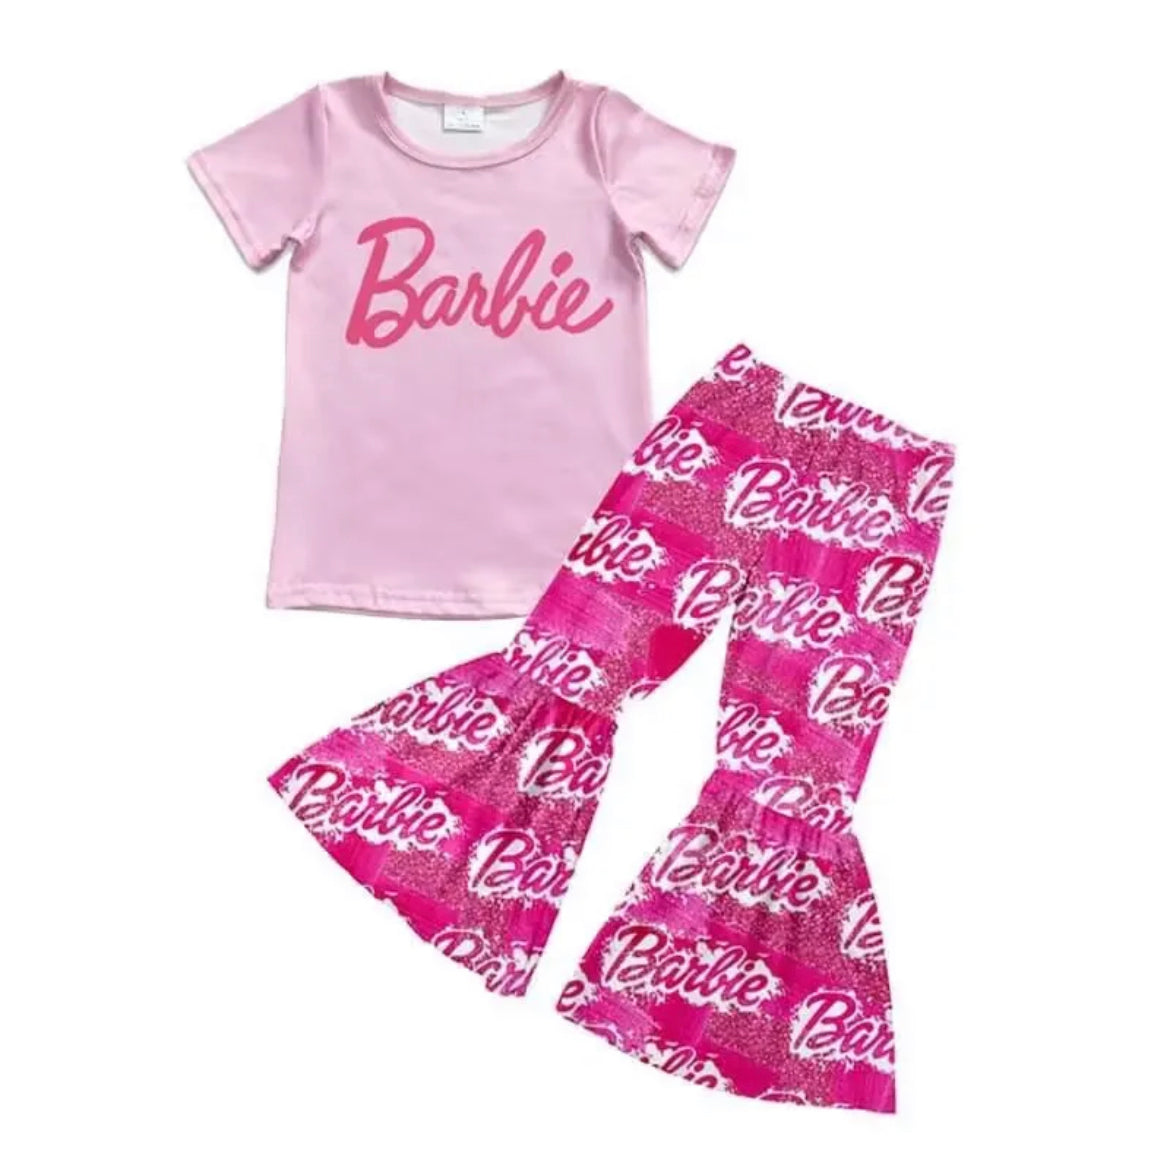 *PRE-ORDER* Barbie Outfits